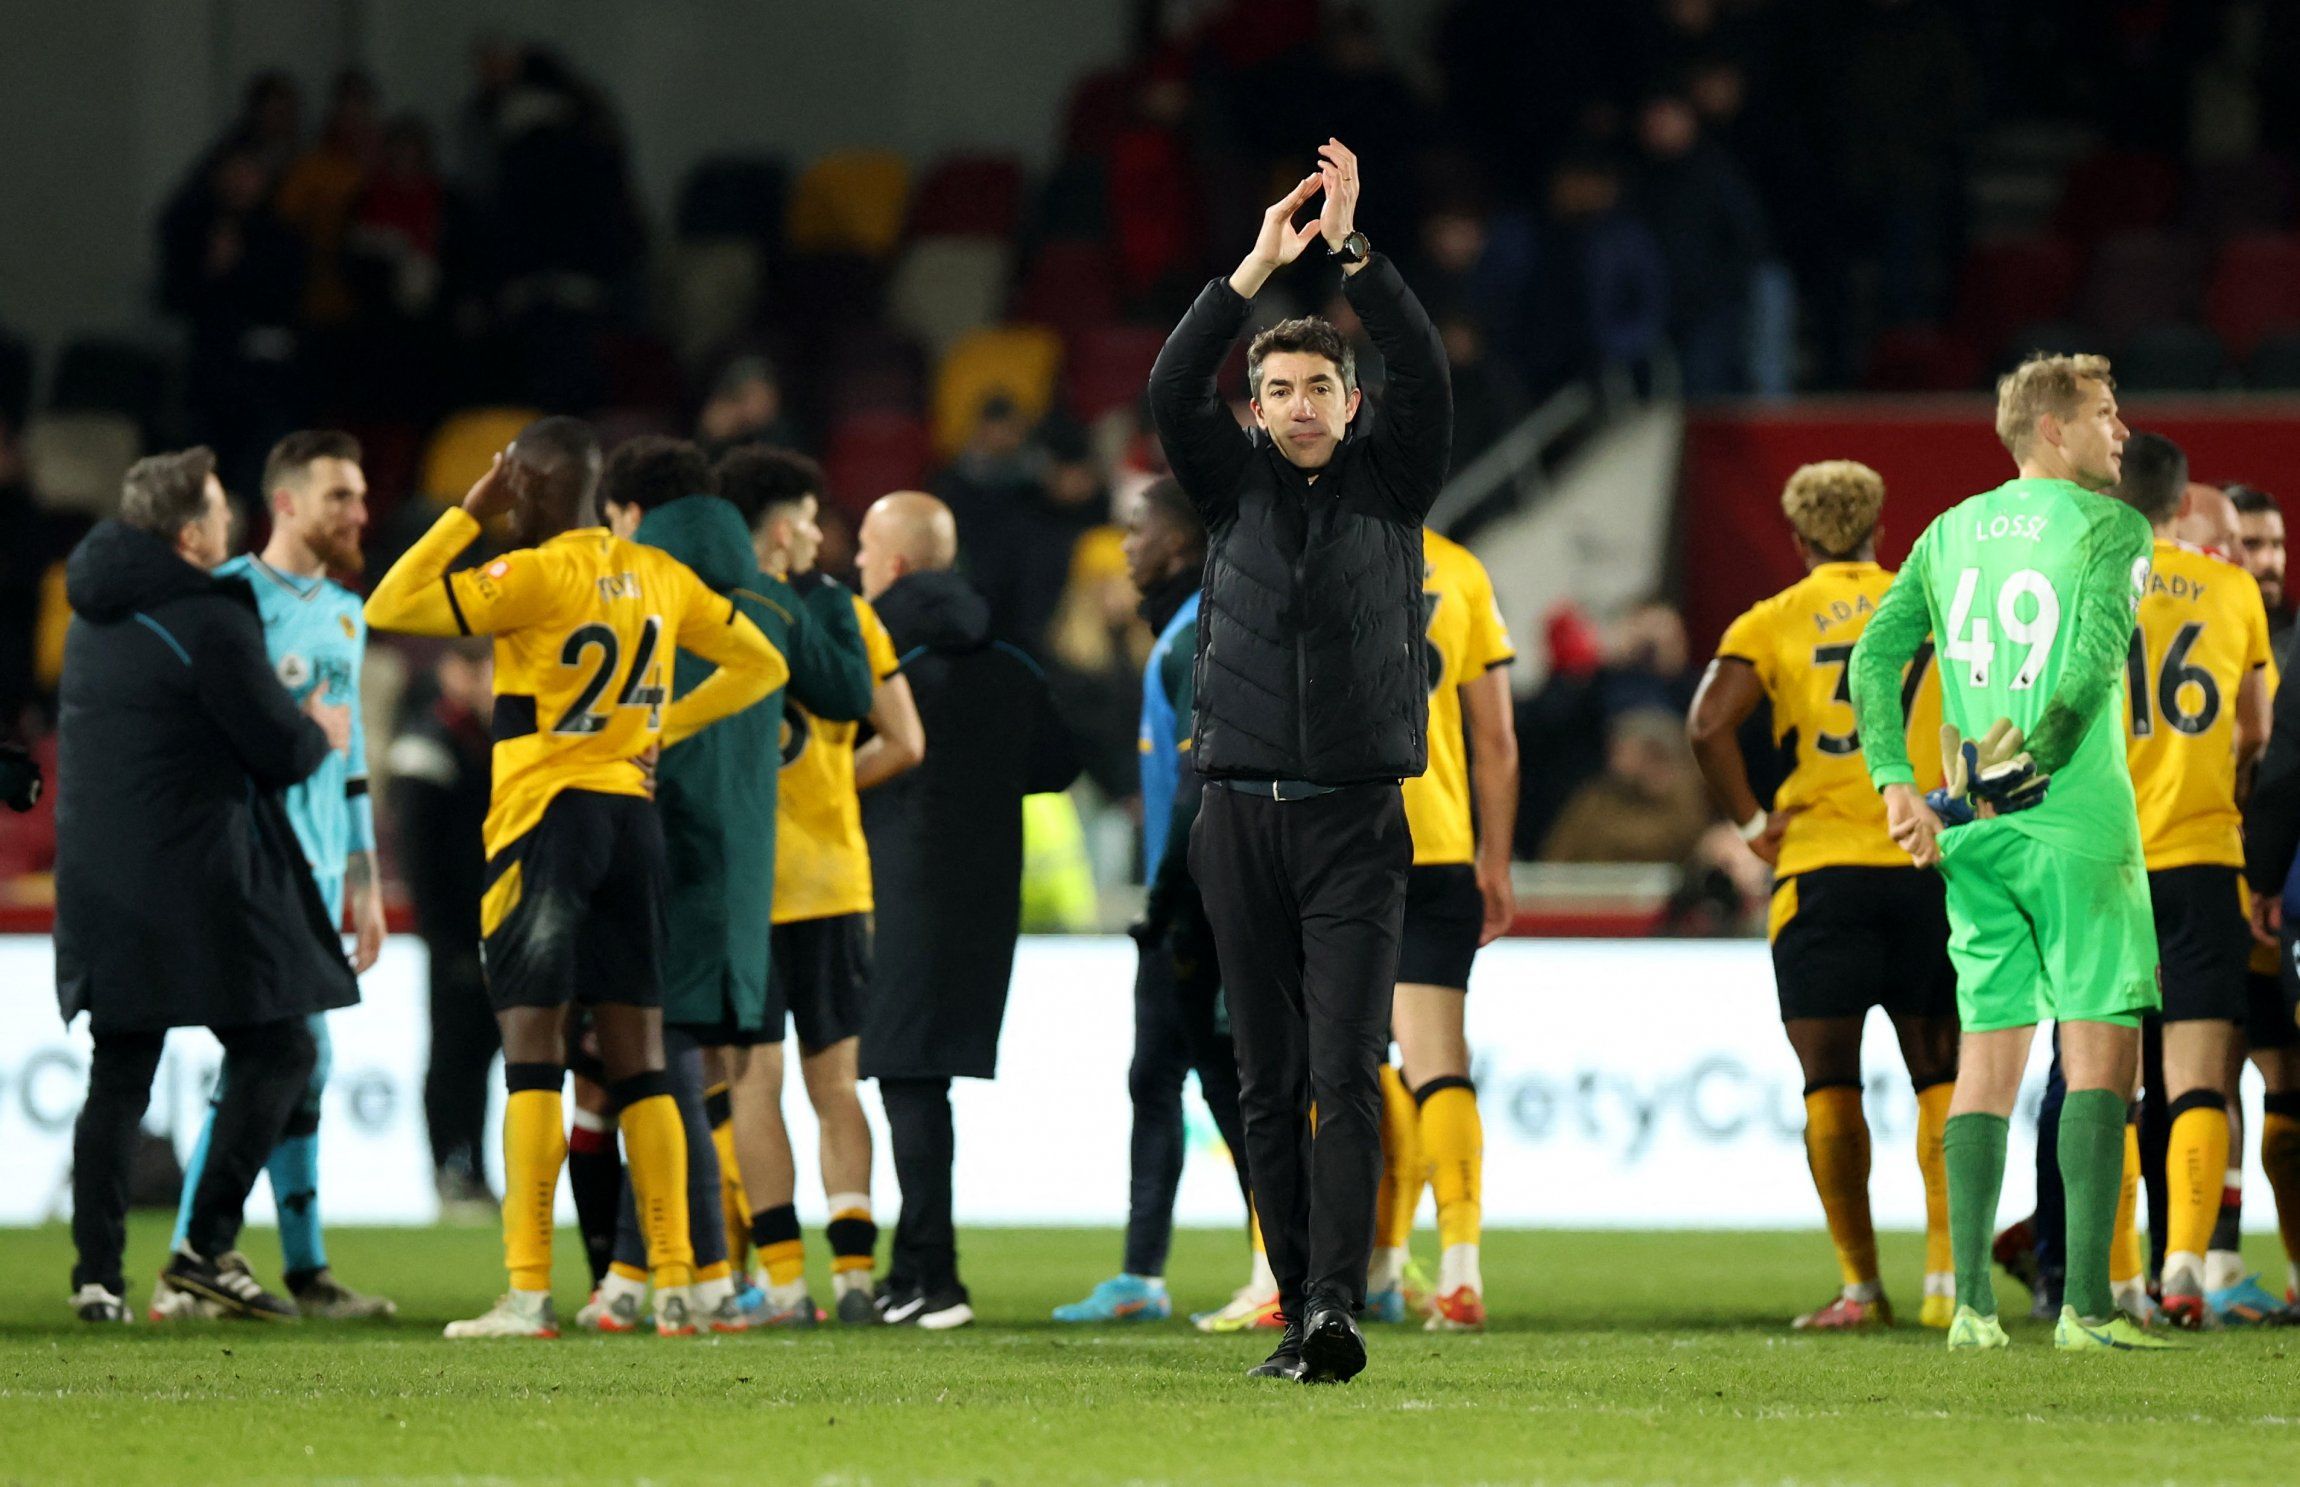 Bruno Lage, Fosun, Jeff Shi, Molineux, The Old Gold, Wolves, Wolves fans, Wolves info, Wolves latest, Wolves news, Wolves updates, WWFC, WWFC news, WWFC update, Premier League, Premier League news, Wolverhampton Wanderers, Wolves injury news, Pedro Neto, Yerson Mosquera, Willy Boly, 
